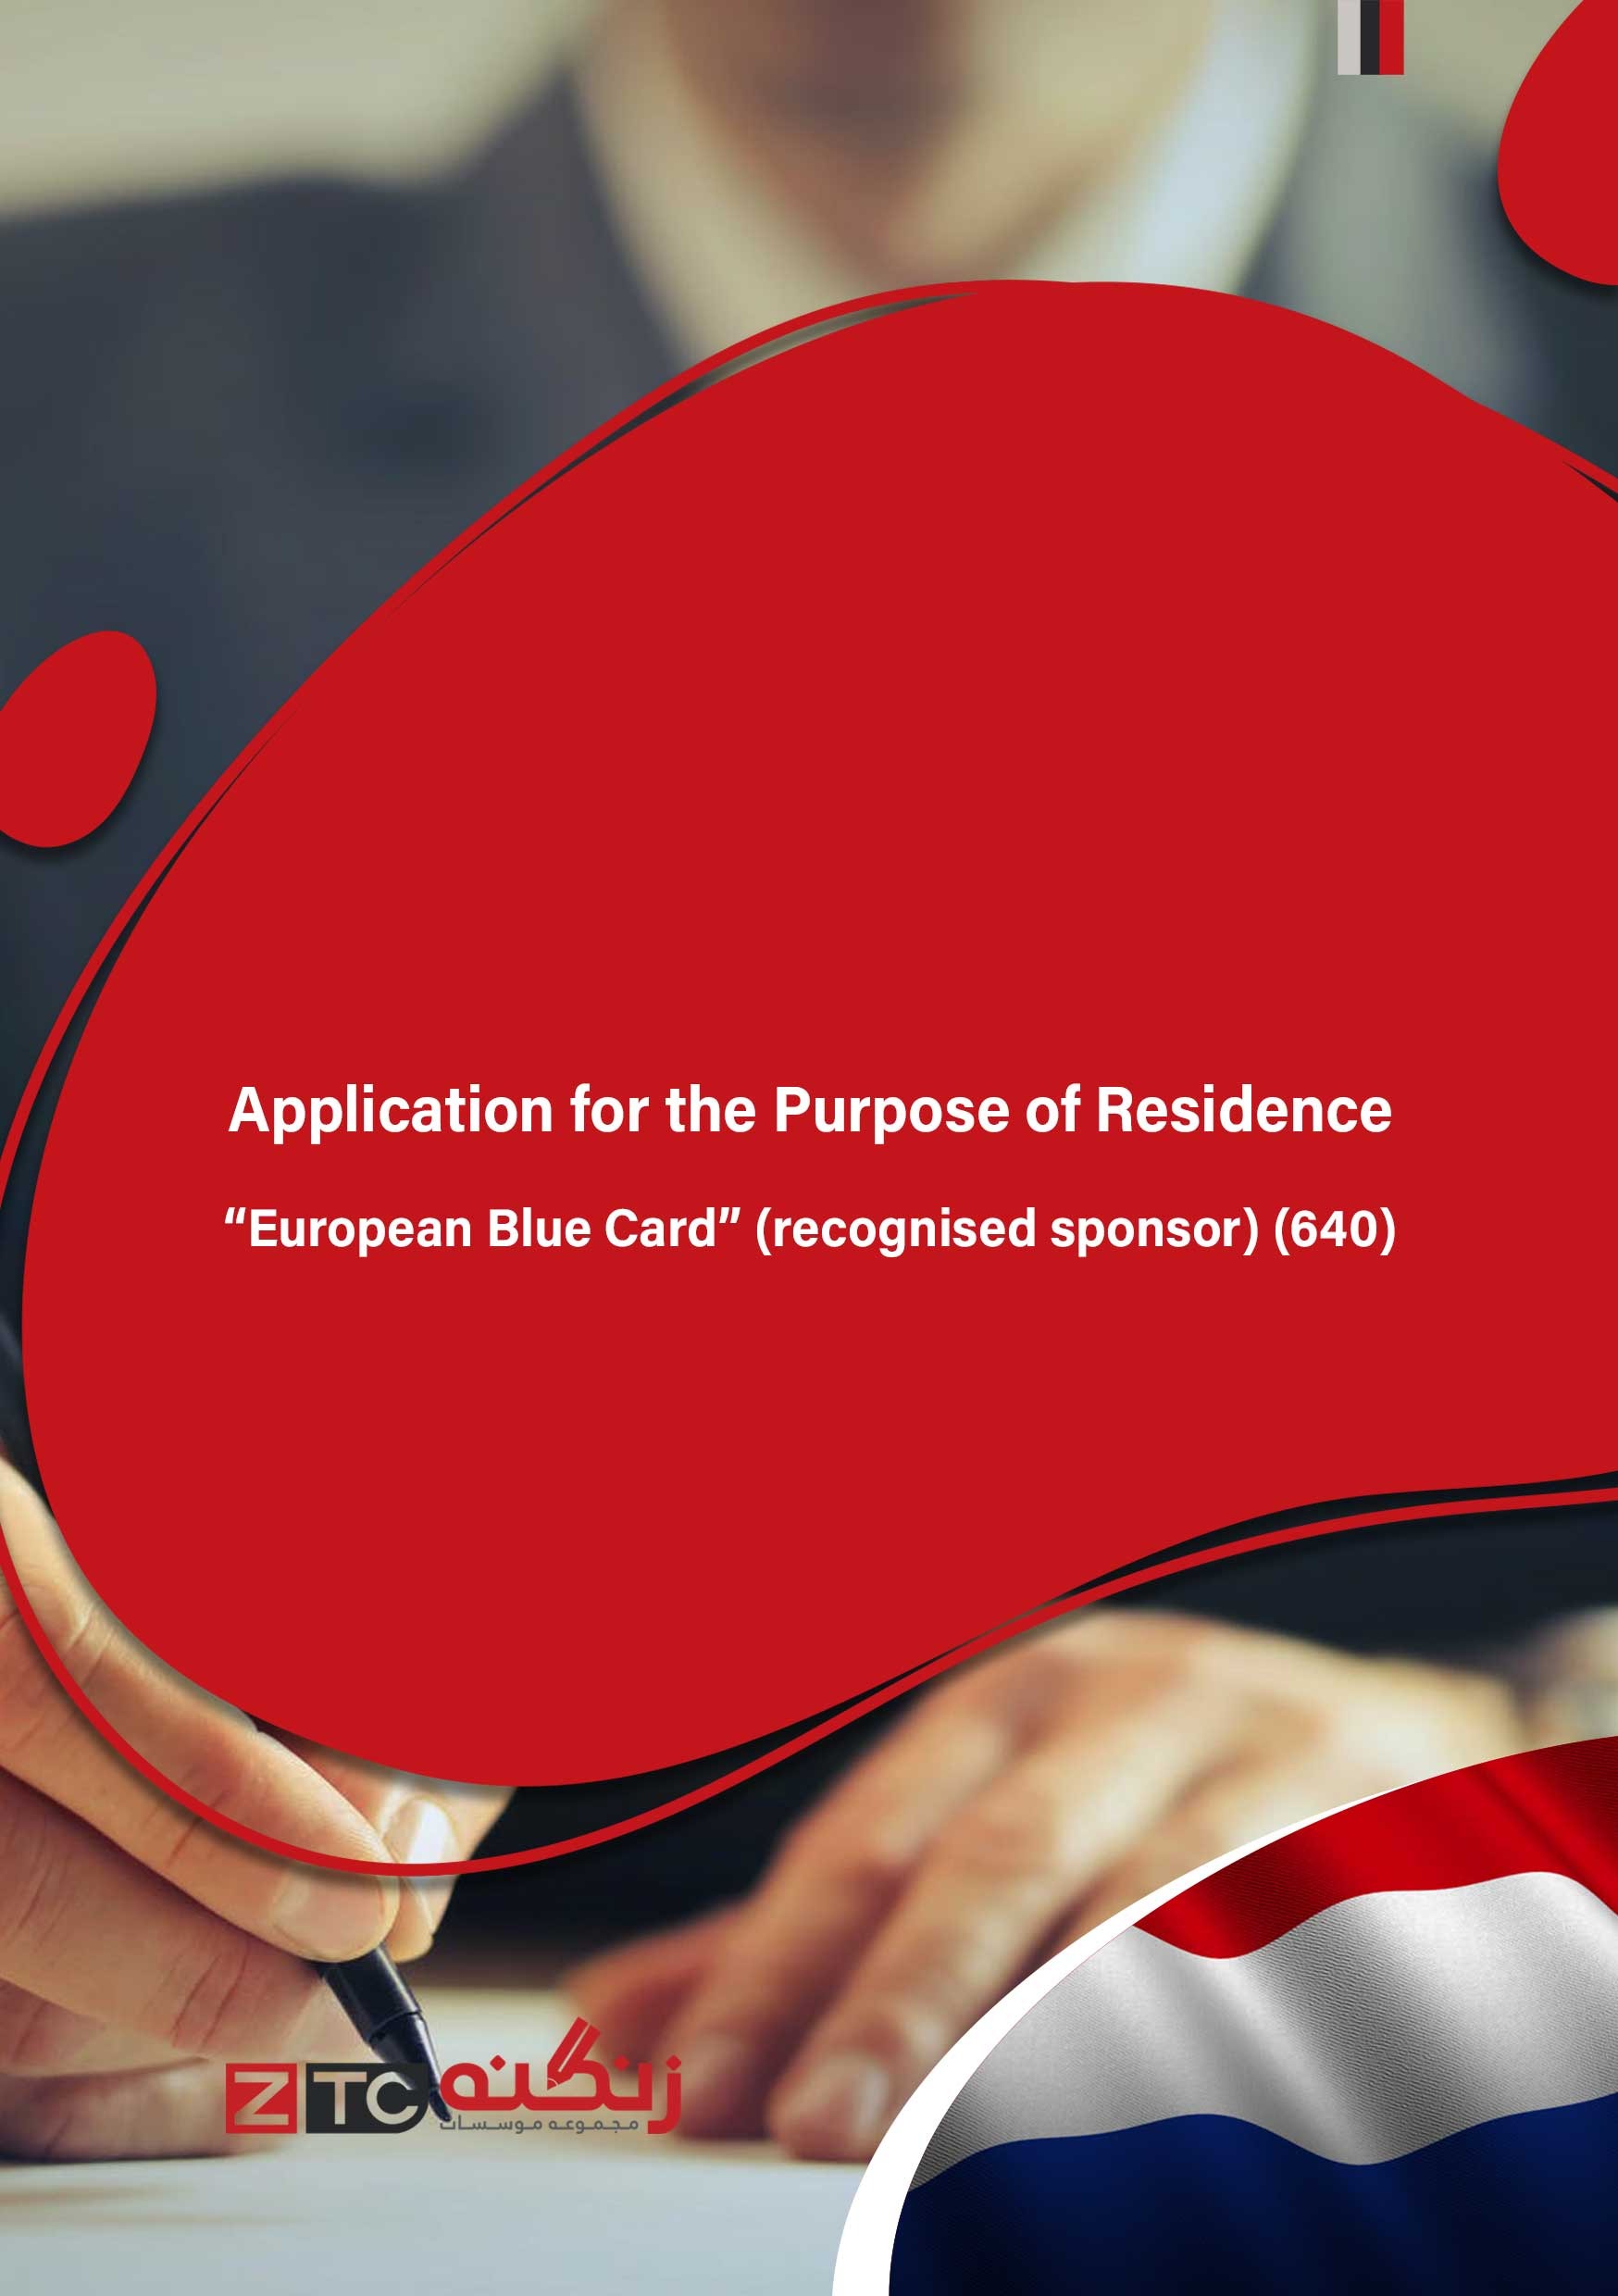 Application for the Purpose of Residence “European Blue Card” (recognised sponsor) (640)